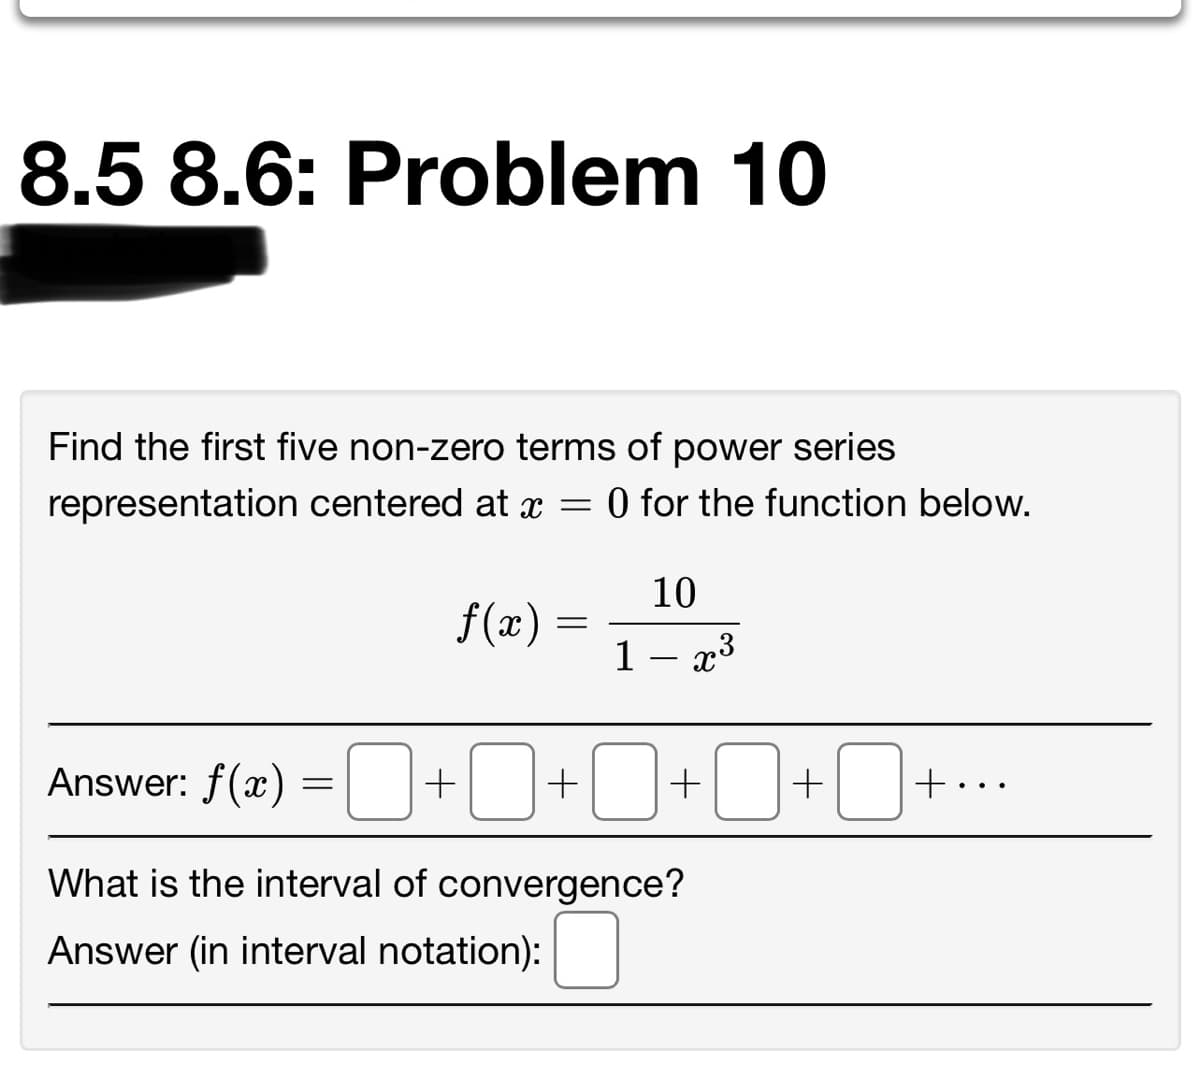 8.5 8.6: Problem 10
Find the first five non-zero terms of power series
representation centered at x =
O for the function below.
10
f(x)
1 – x3
Answer: f(æ) =O+0+0+D+O-
+...
What is the interval of convergence?
Answer (in interval notation):
